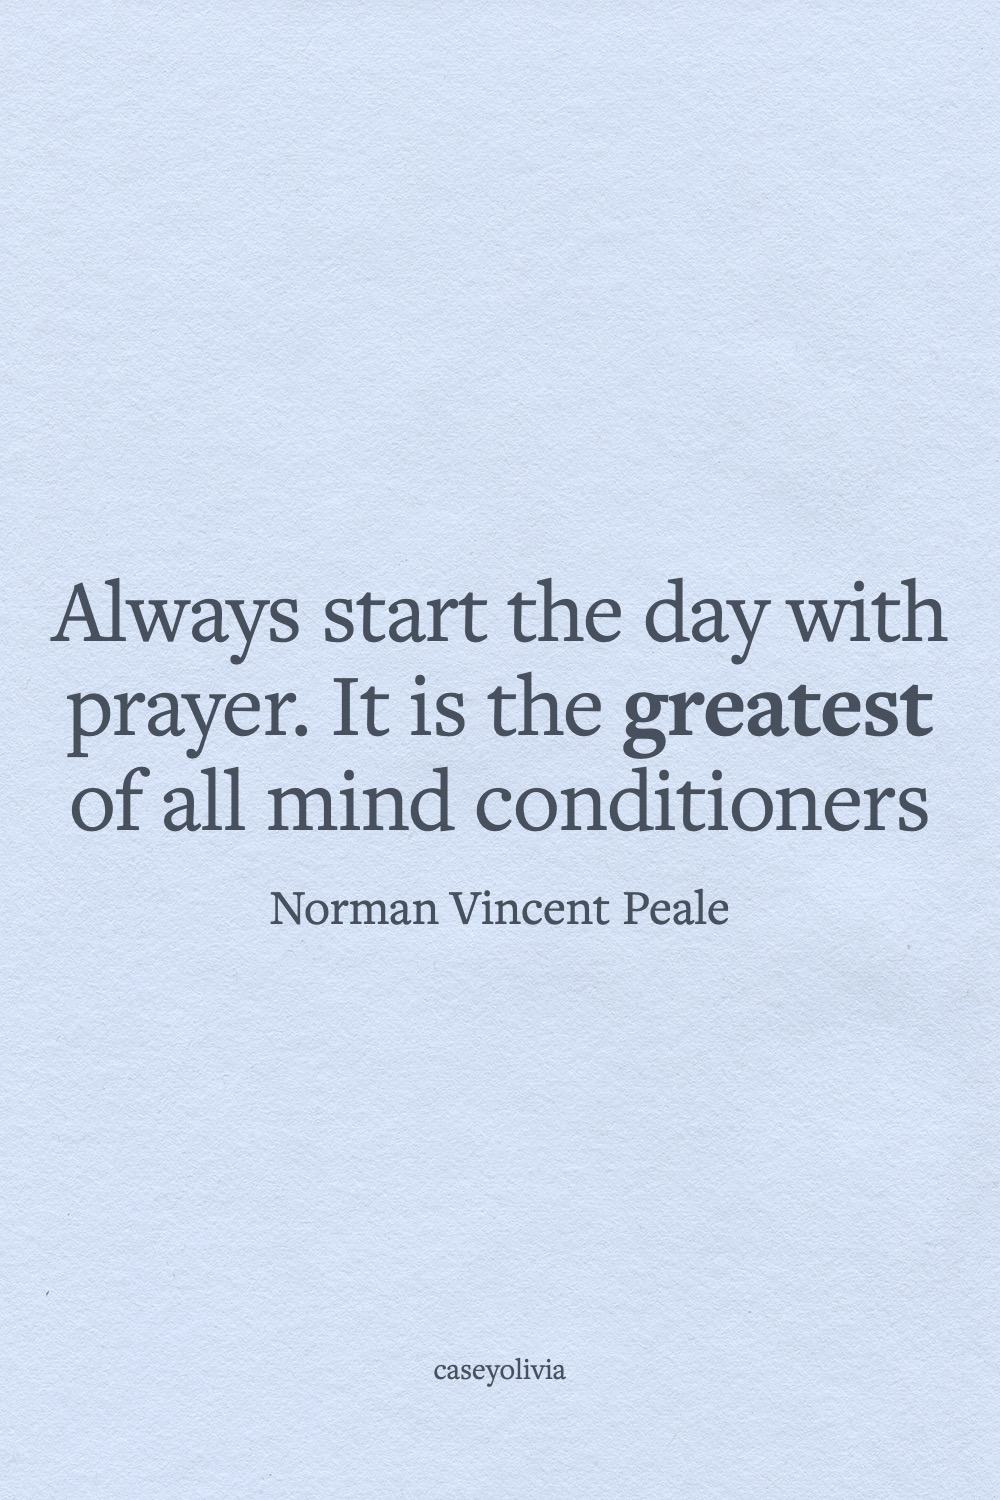 norman vincent peale start the day with prayer